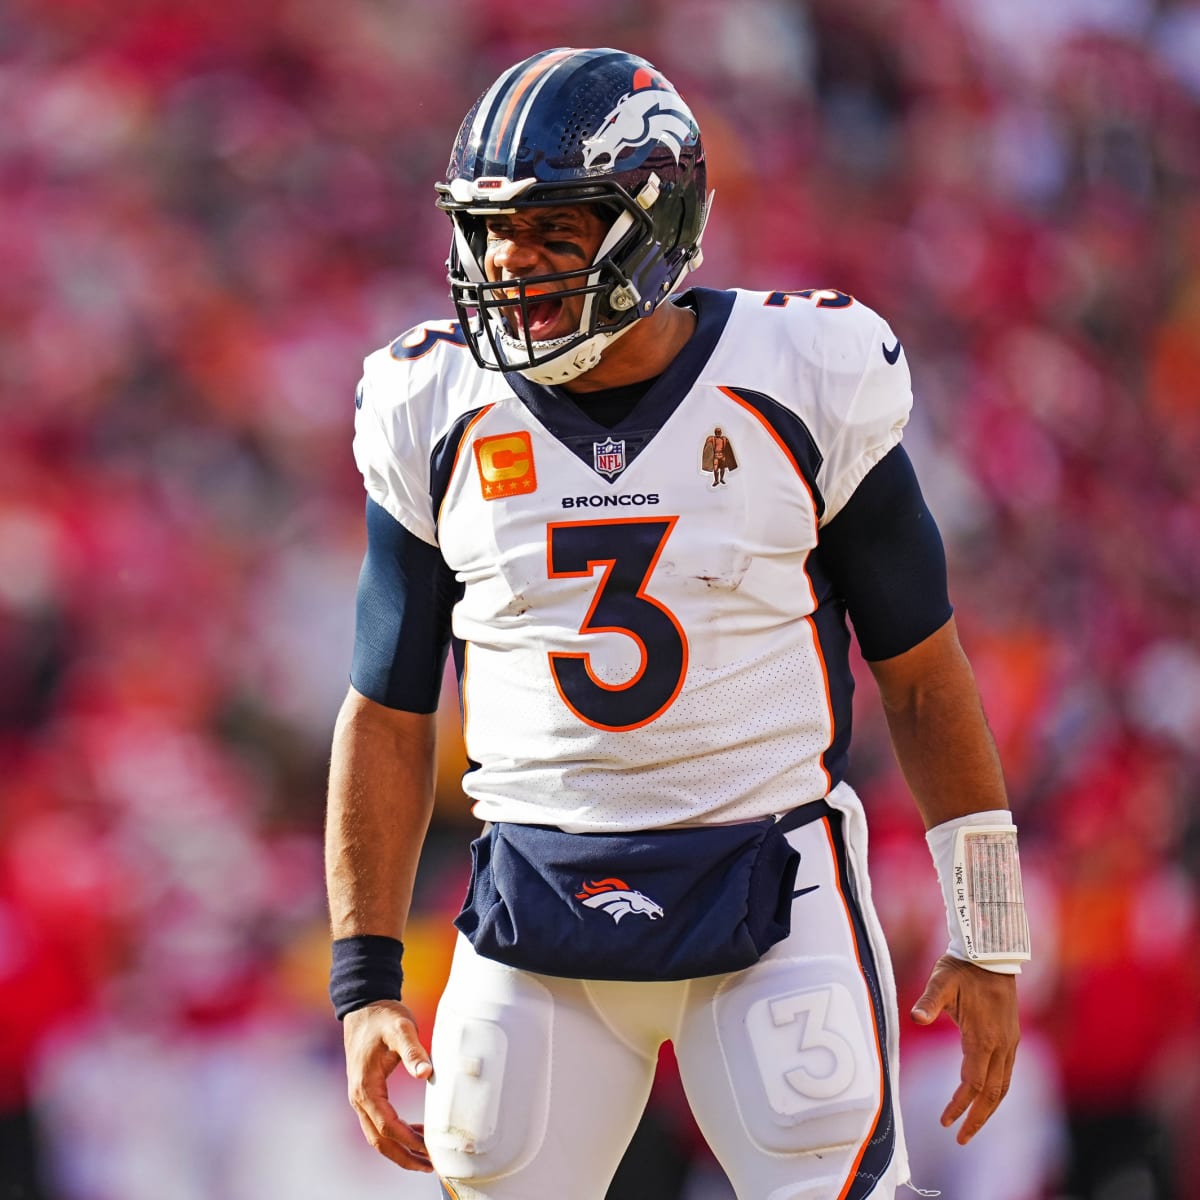 Broncos coach Sean Payton aims to help Russell Wilson revive his career  after awful 2022 season - The San Diego Union-Tribune